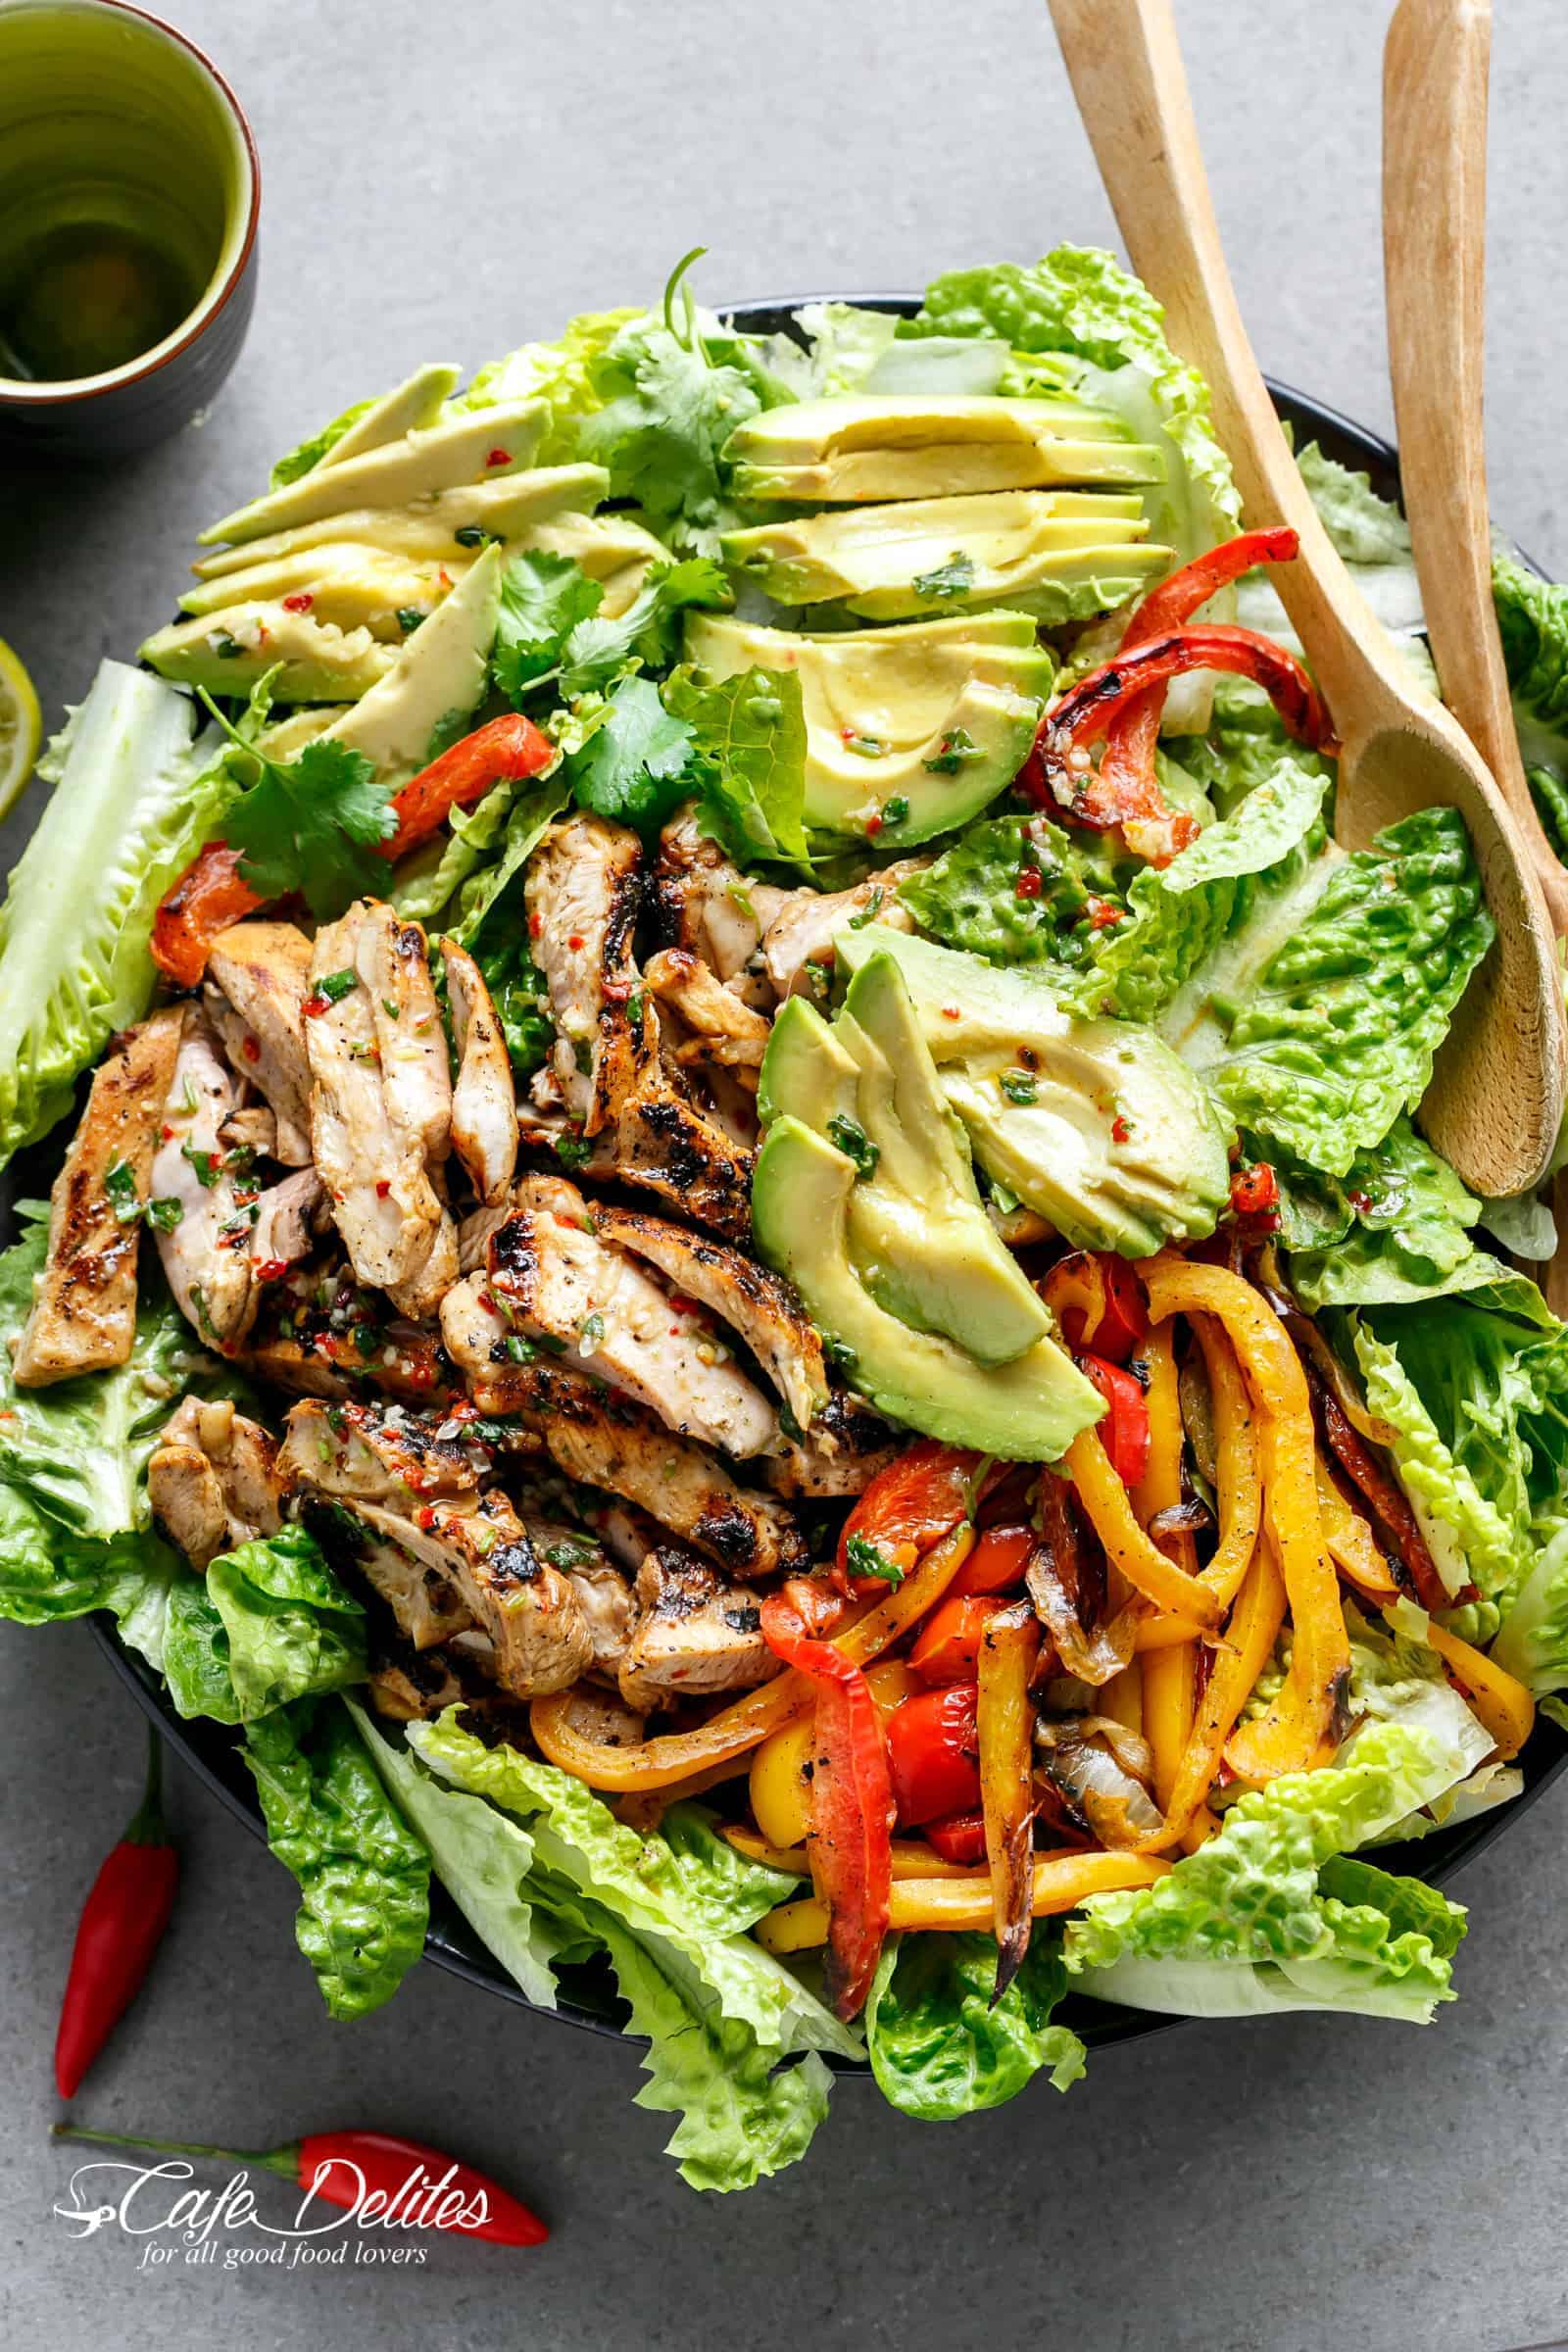 Grilled Chili Lime Chicken Fajita SaladÂ with a dressingÂ that doubles as a marinade! AÂ genius way of keeping ALLÂ of the incredible flavours in this salad! | cafedelites.com